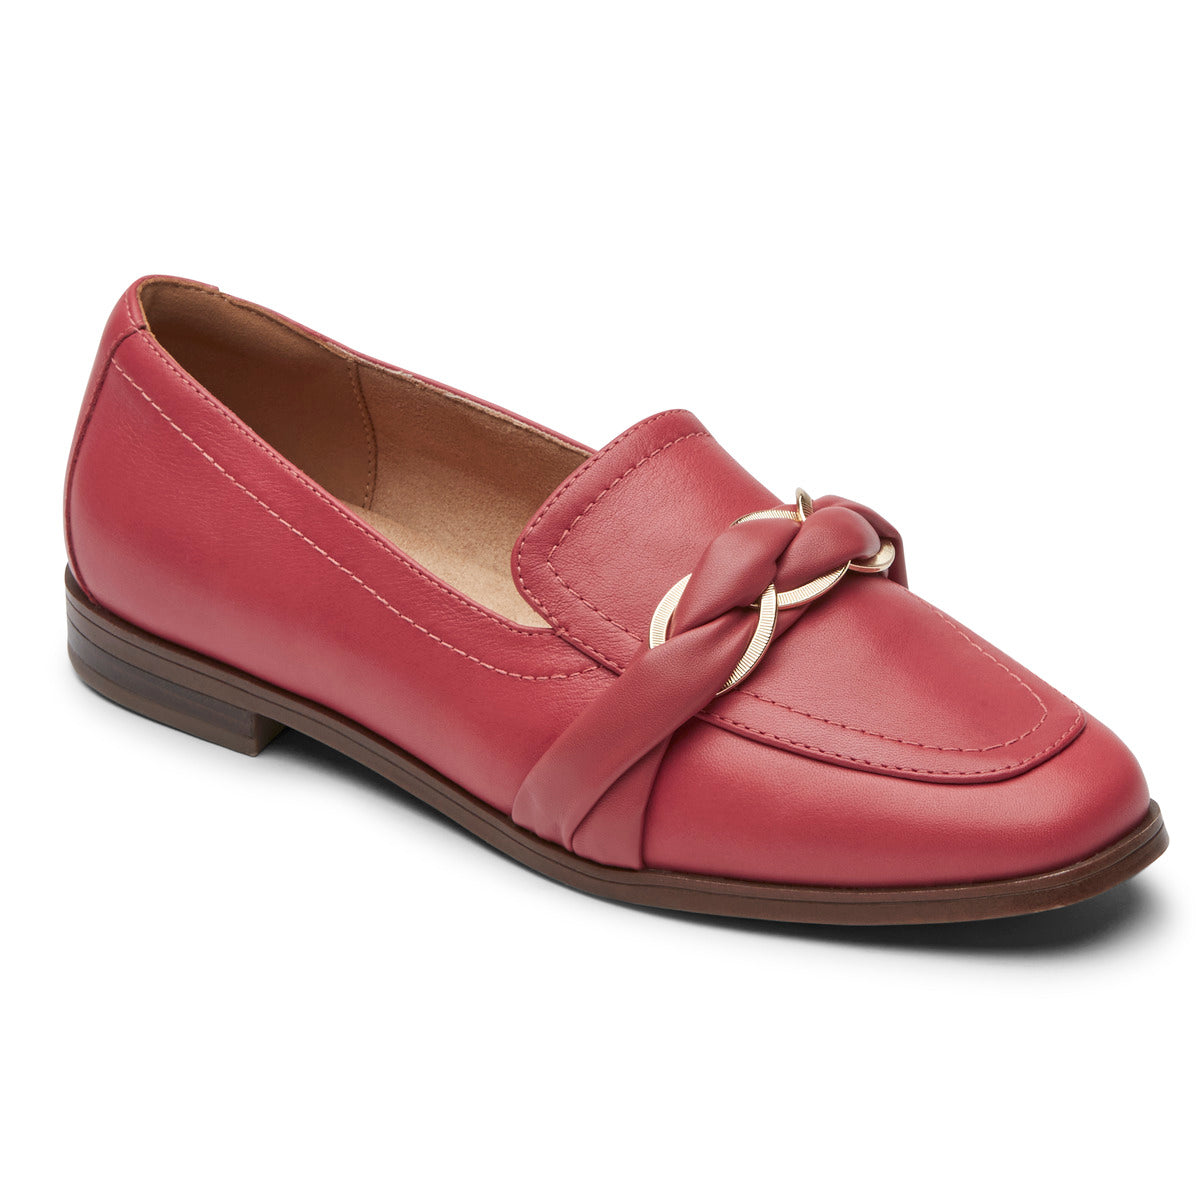 Rockport Womens Susana Woven Chain Loafer